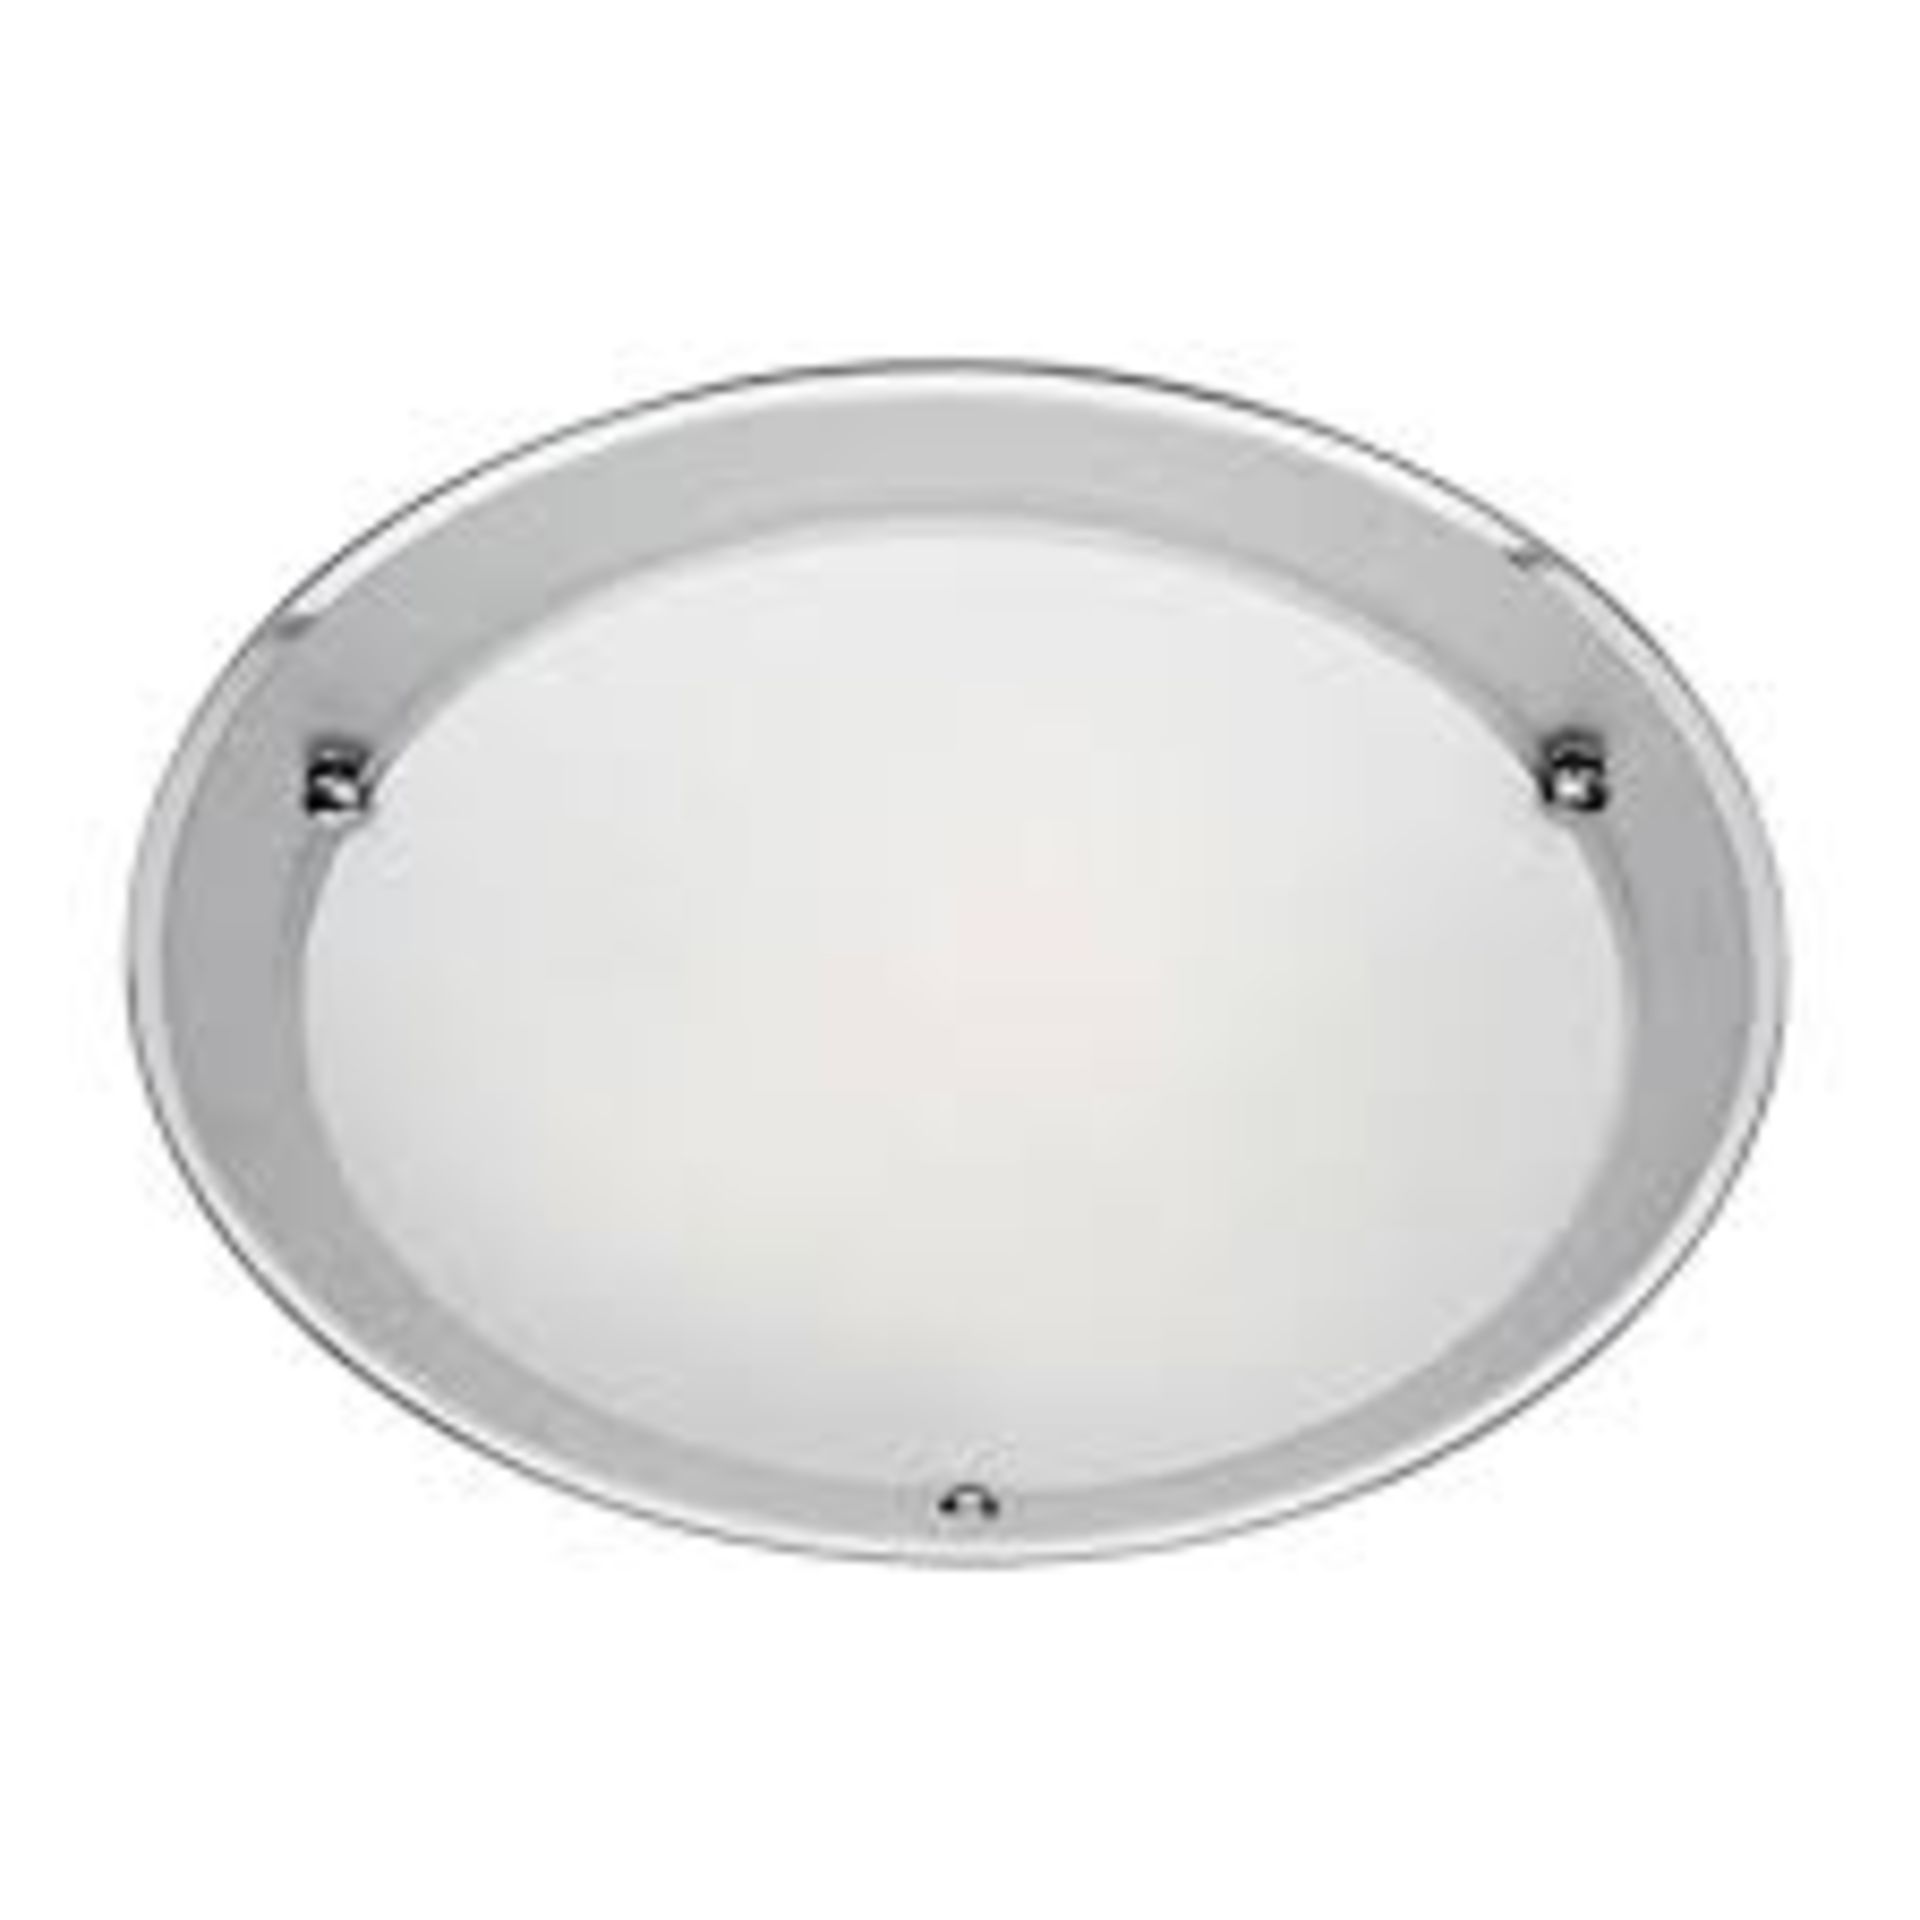 1 x Searchlight Flush fitting with a frosted glass diffuser - Ref: 8232-32 - New and Boxed Stock - Image 2 of 2